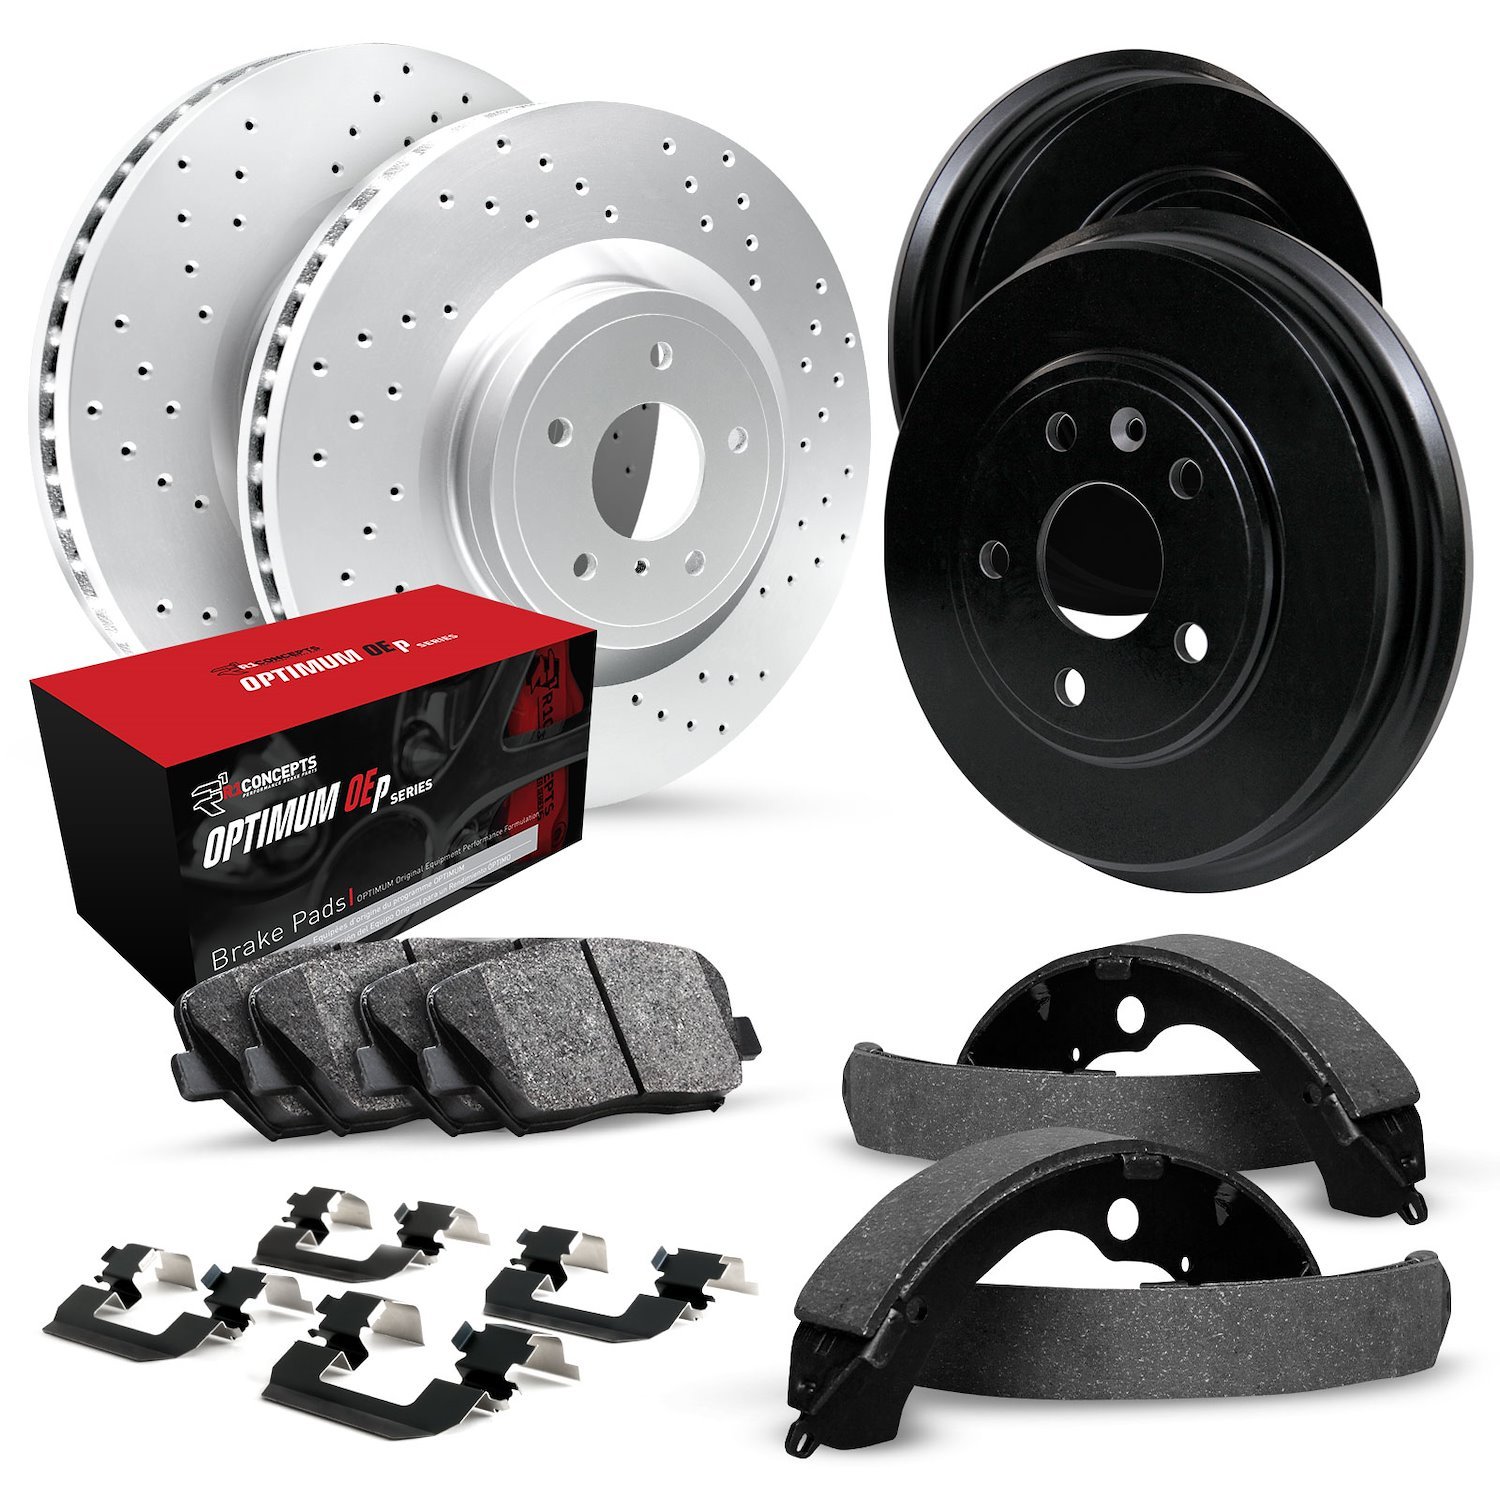 GEO-Carbon Drilled Brake Rotor & Drum Set w/Optimum OE Pads, Shoes, & Hardware, 1990-1990 GM, Position: Front & Rear